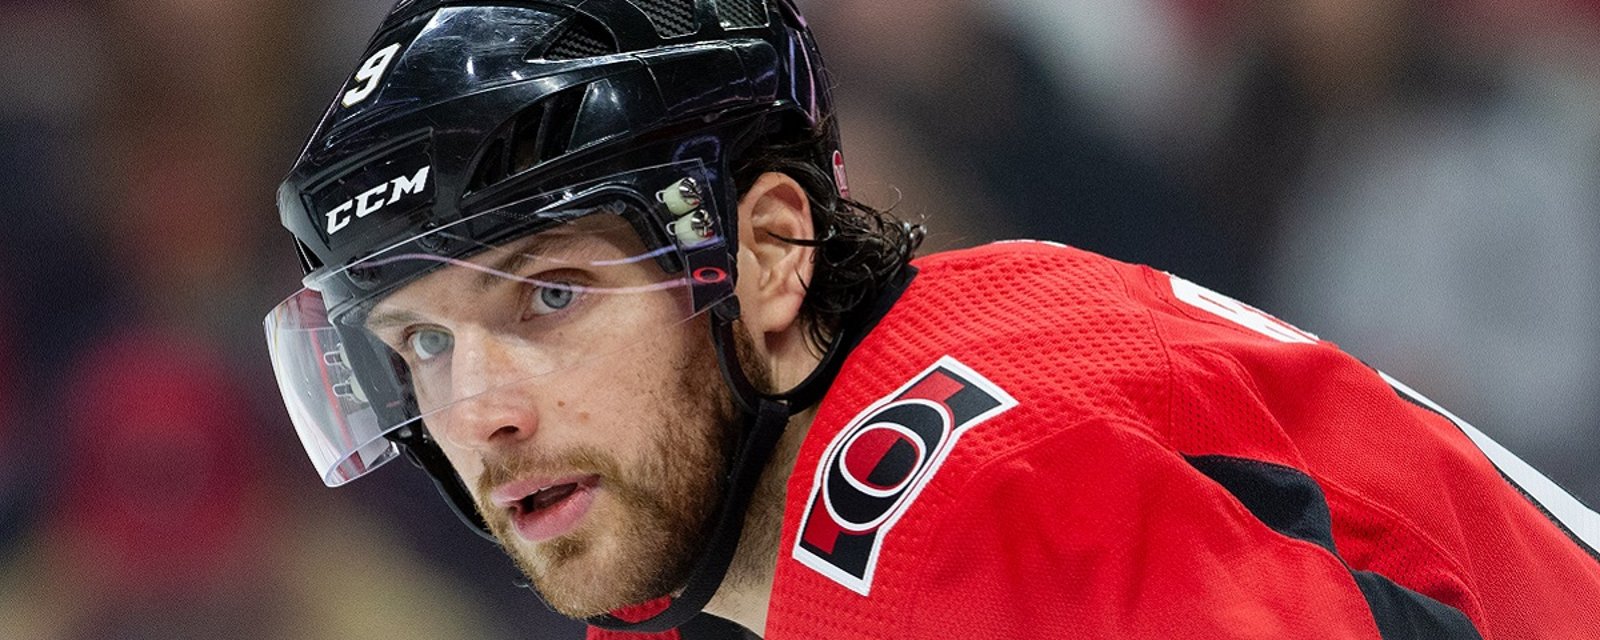 Bobby Ryan fired over comments about women's sports.